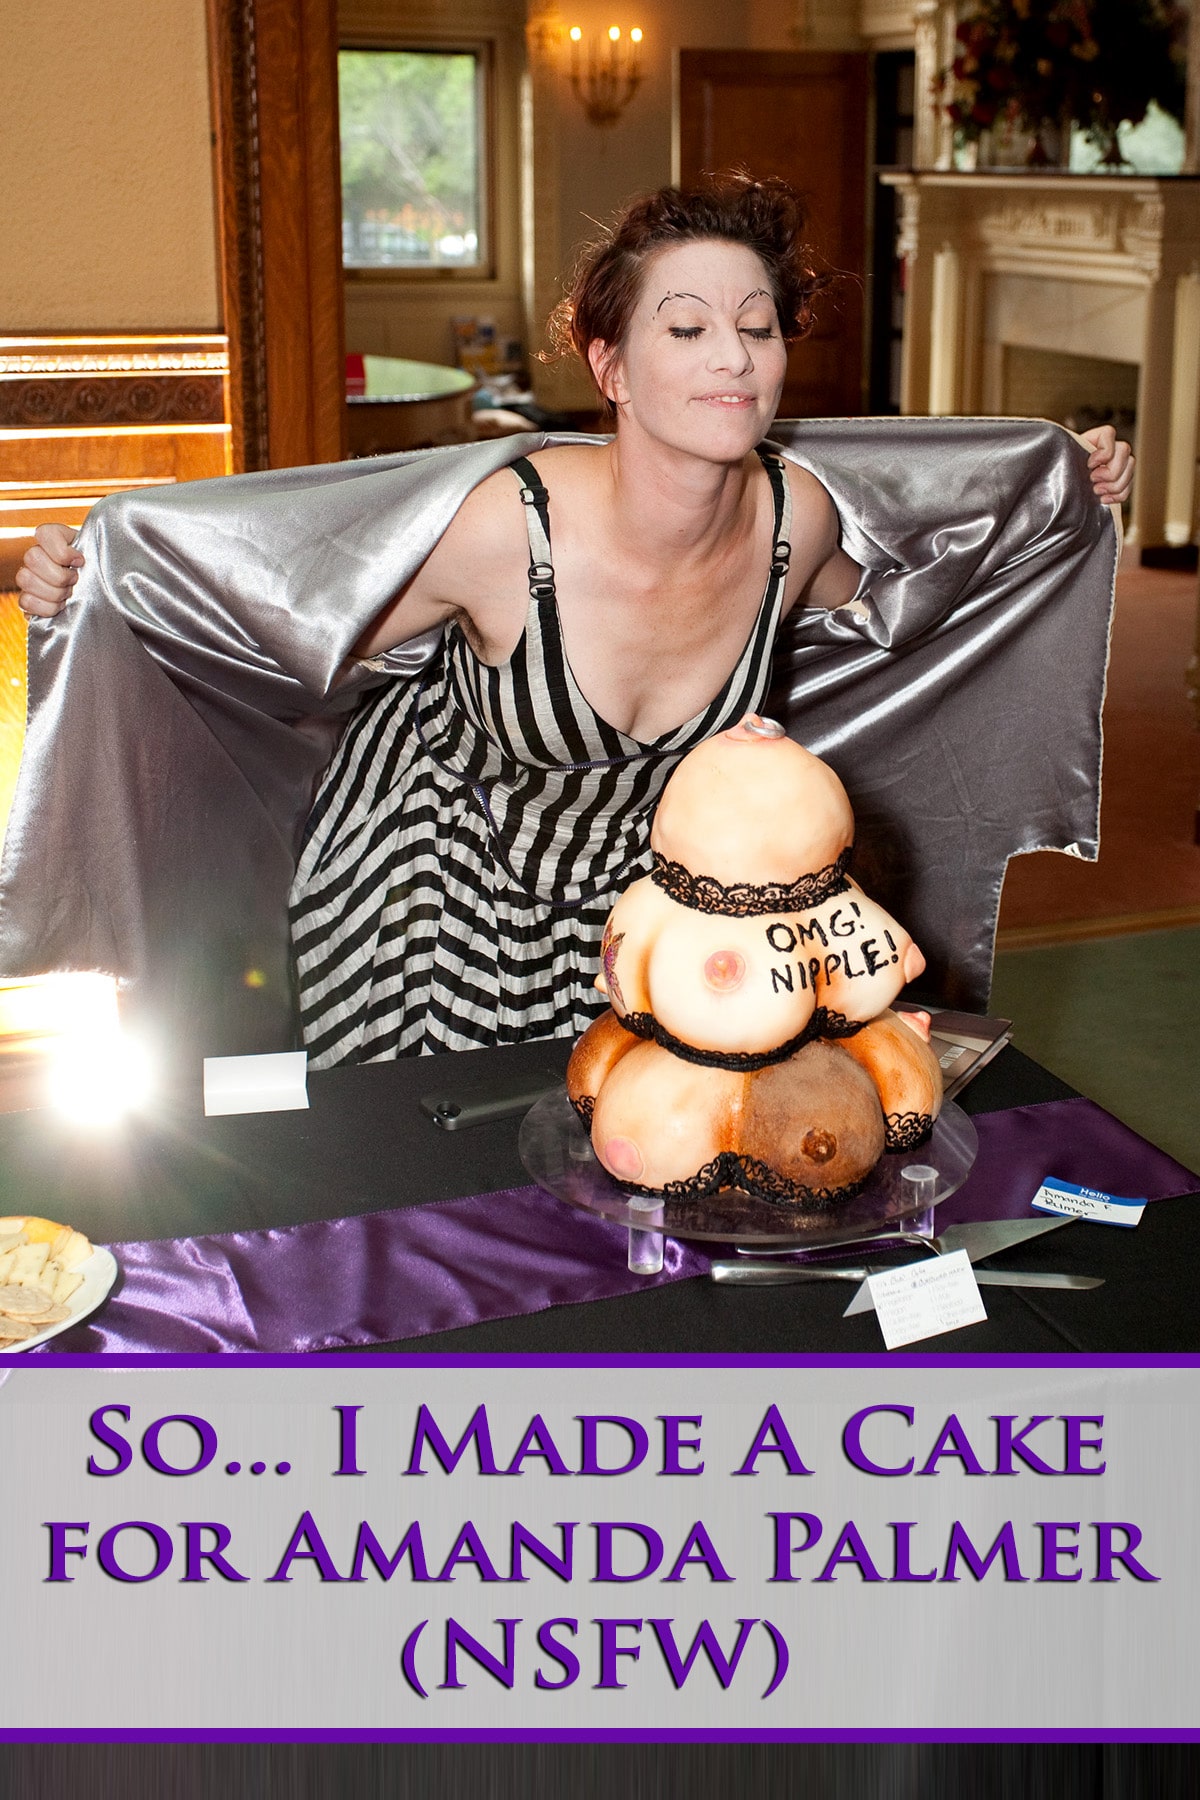 Amanda Palmer standing behind a cake that looks like a pile of breasts.